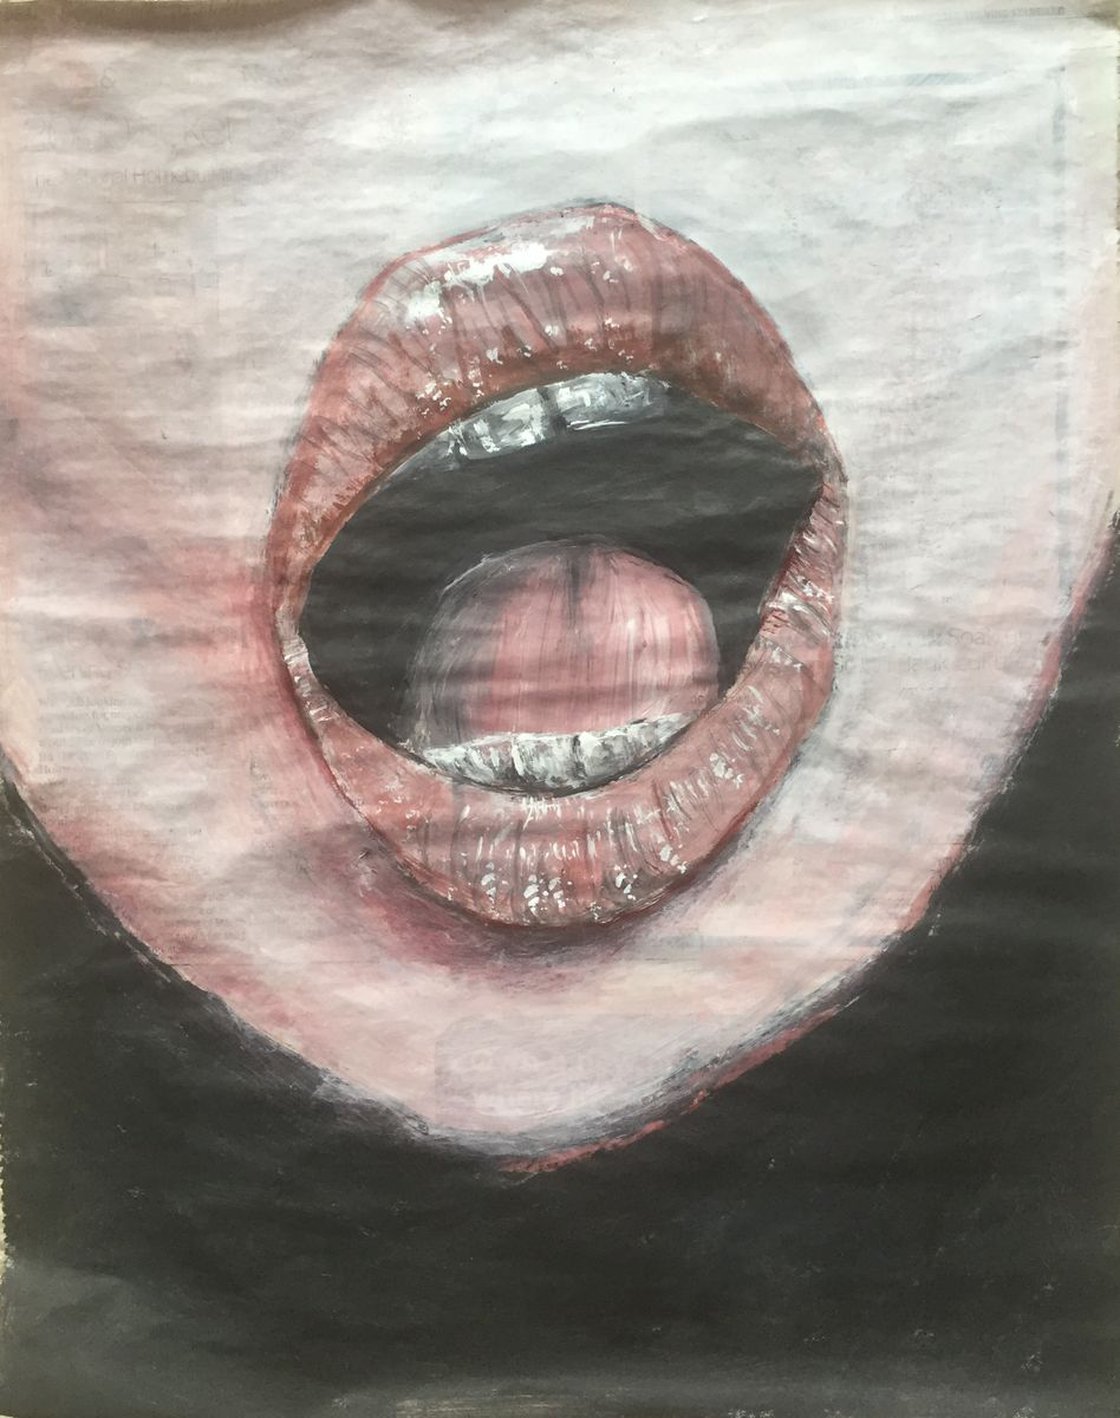 open mouth painting